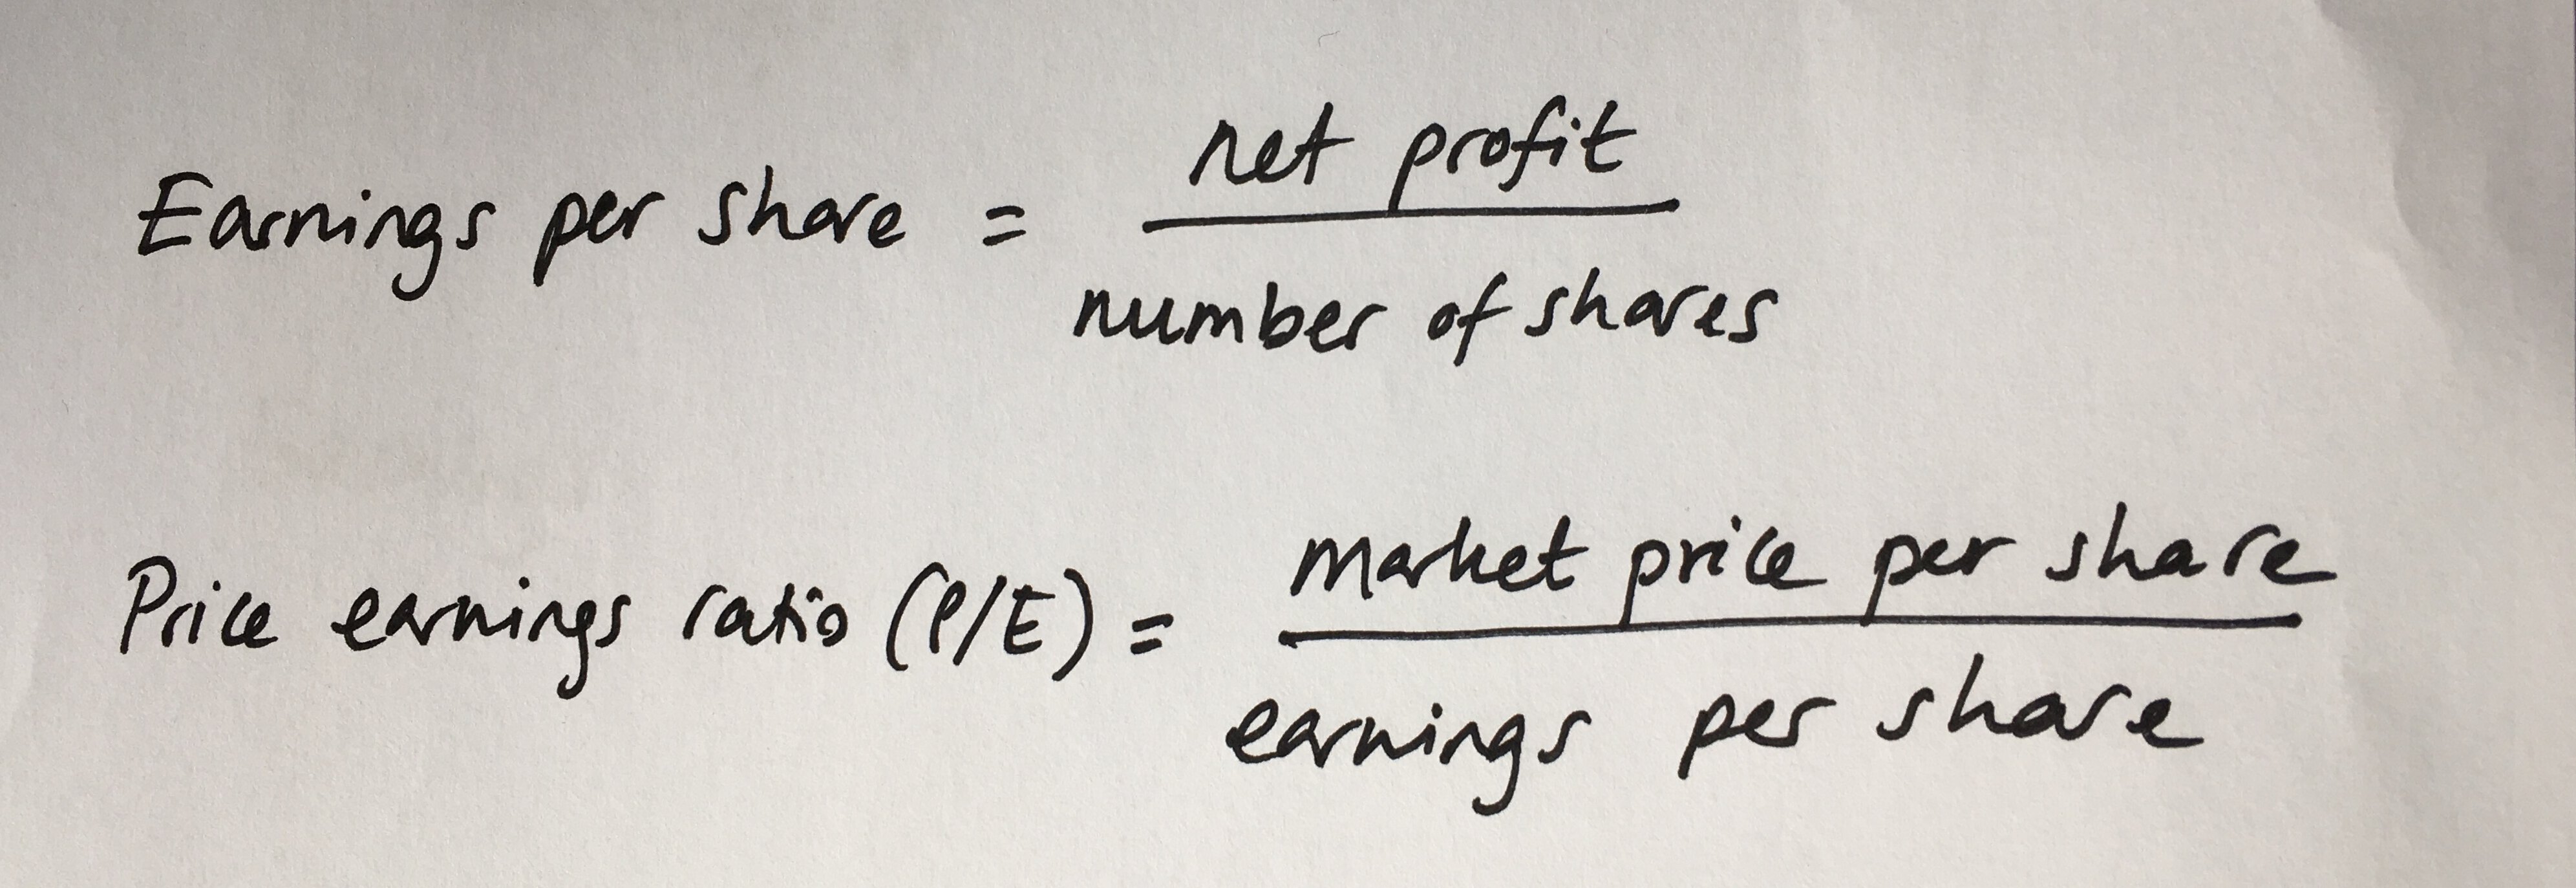 earnings per share and P/E ratio calculations